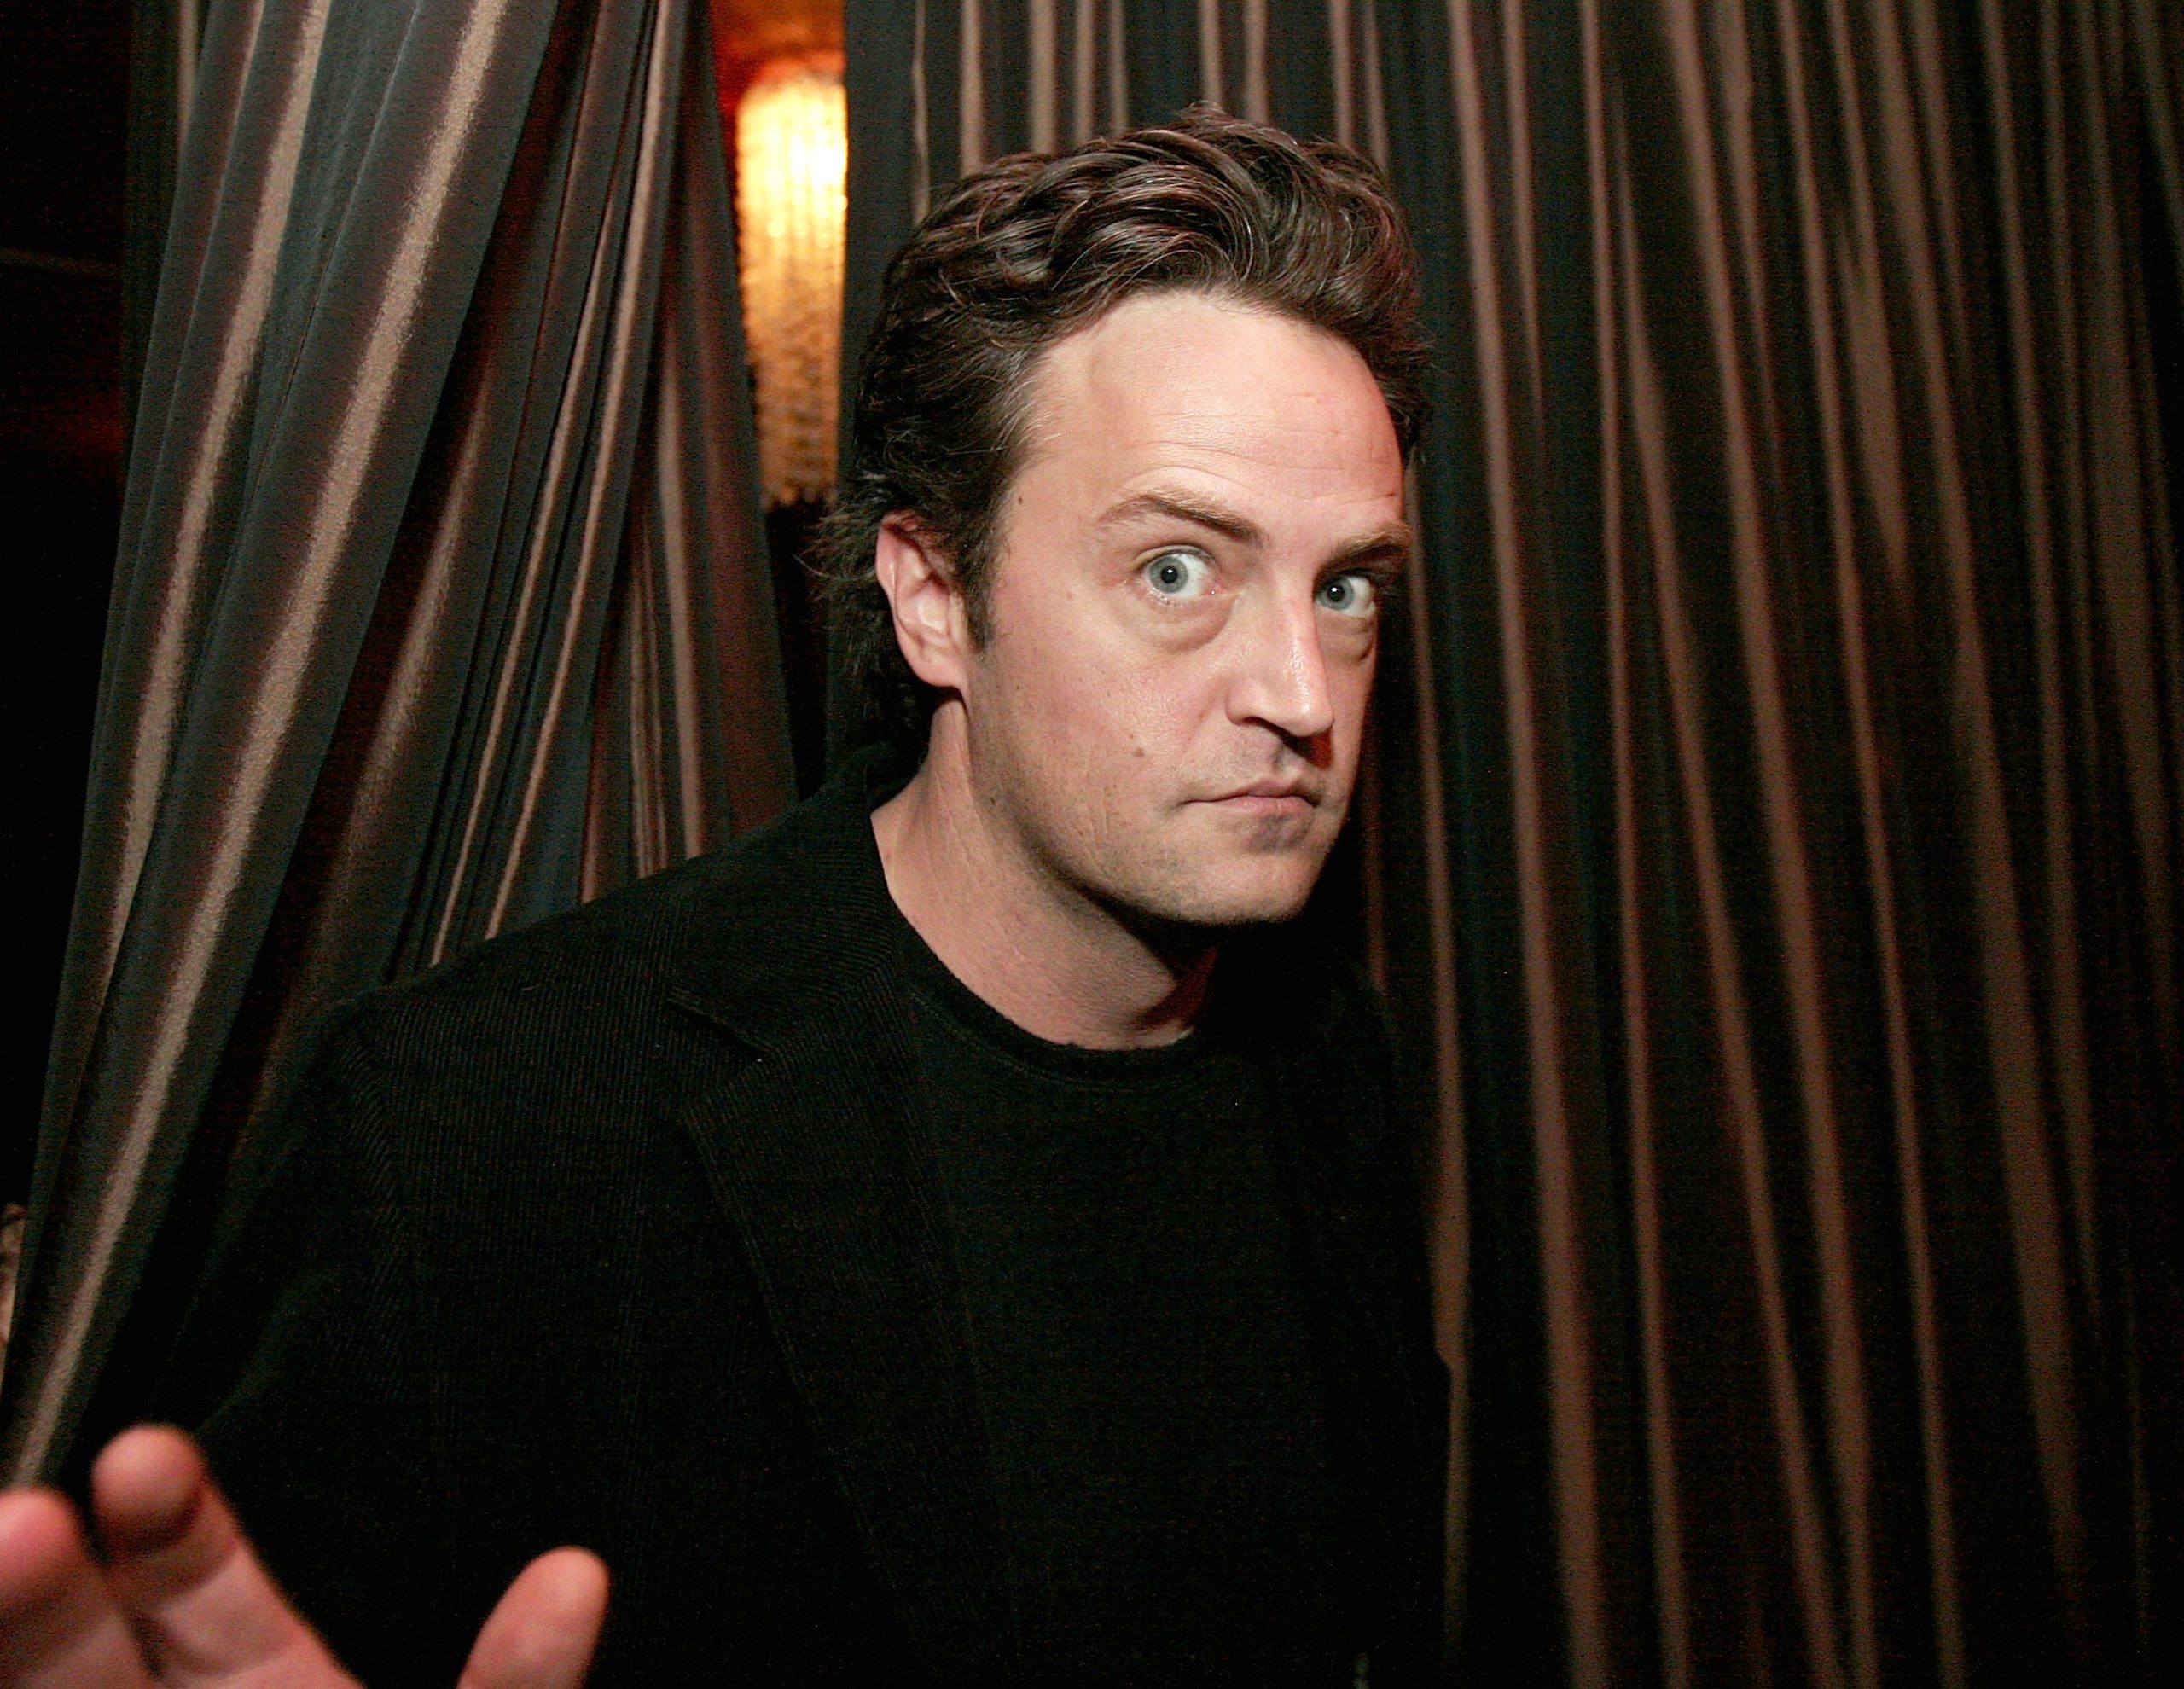 LOS ANGELES, CA - DECEMBER 09: Actor Matthew Perry at the after party for the FX Network's premiere screening of "Dirt" at Republic on December 9, 2006 in Los Angeles, California. (Photo by Charley Gallay/Getty Images)